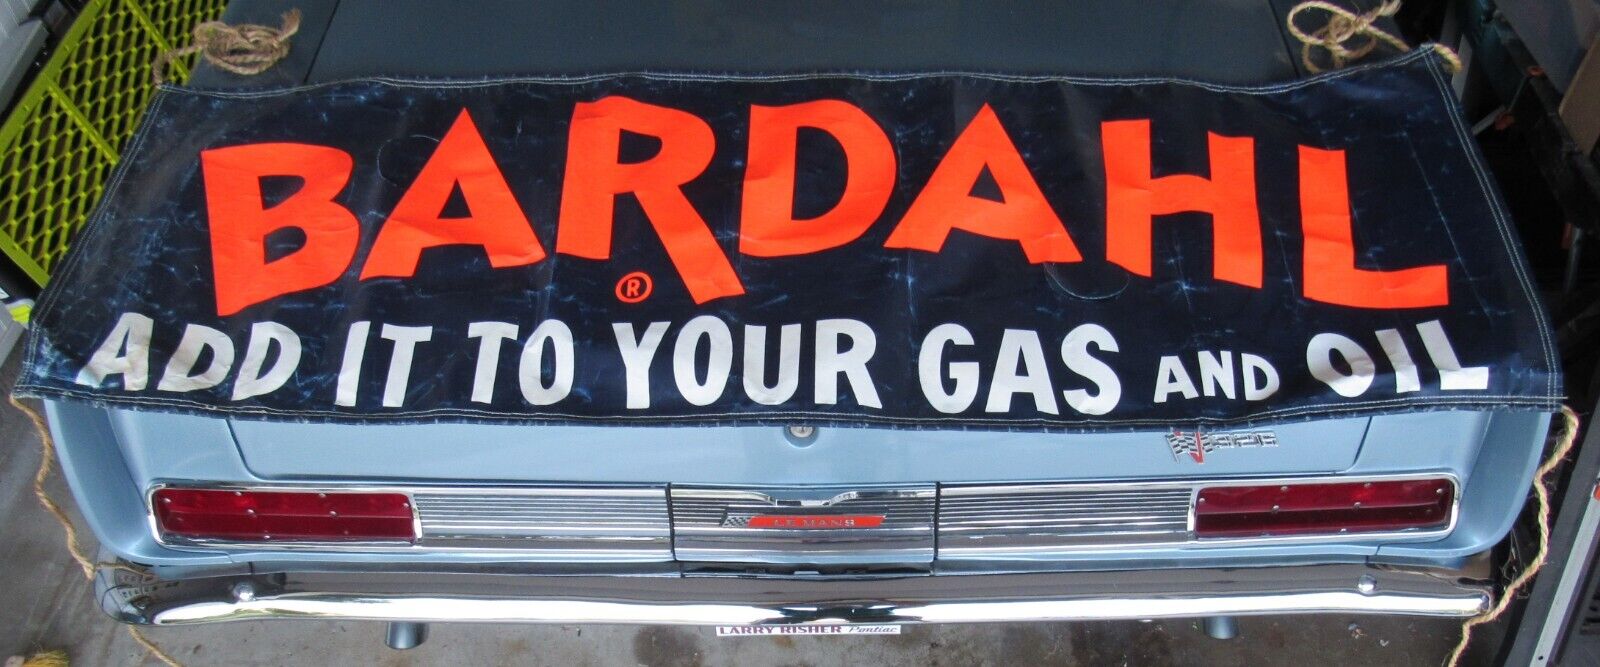 Vintage BARDAHL ADD IT TO YOUR GAS & OIL Gas Station HUGE Bay Banner Sign 65x21